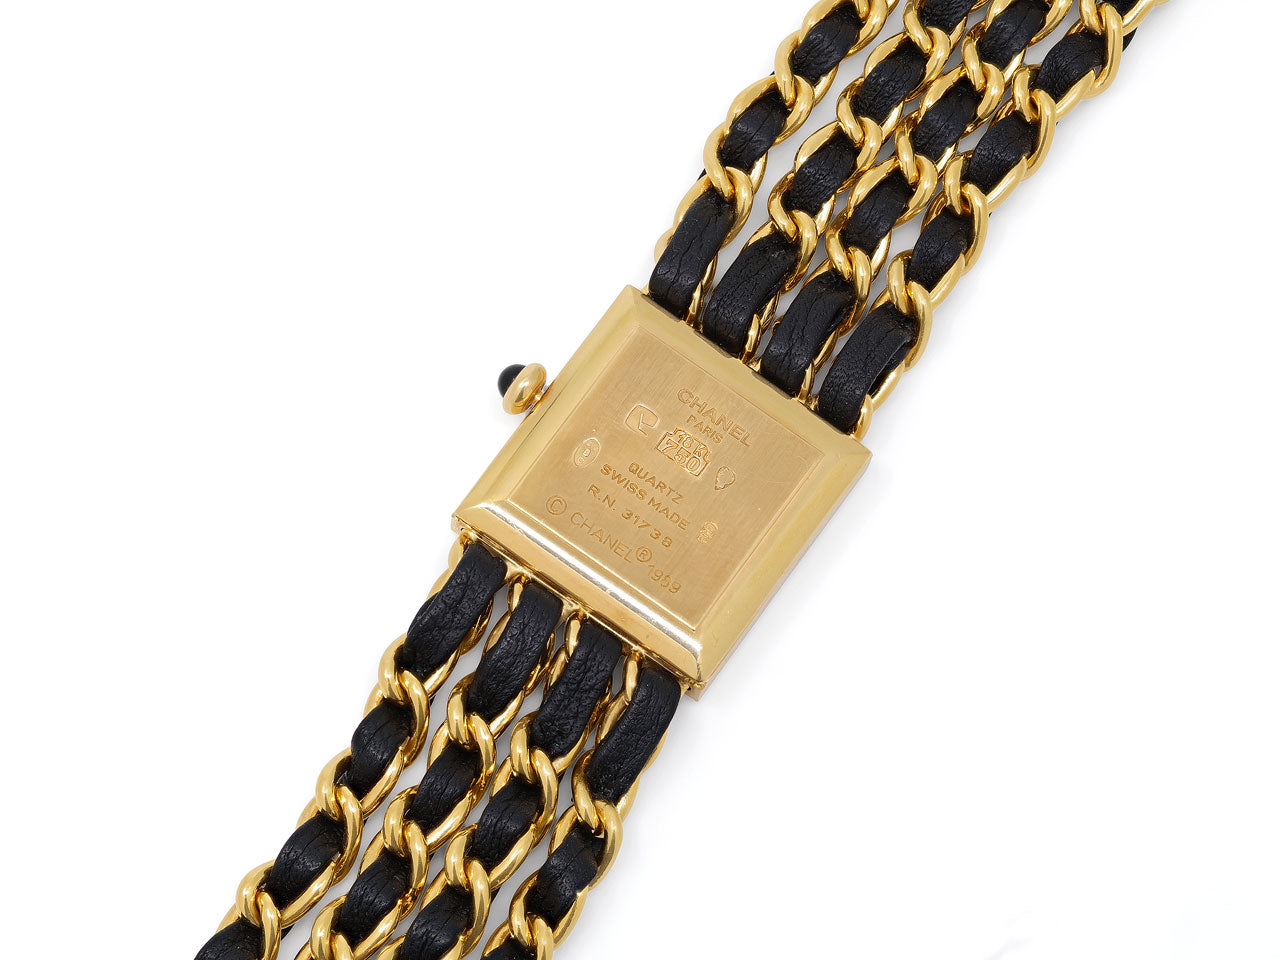 Chanel 'Mademoiselle' Watch in 18K Gold and Leather